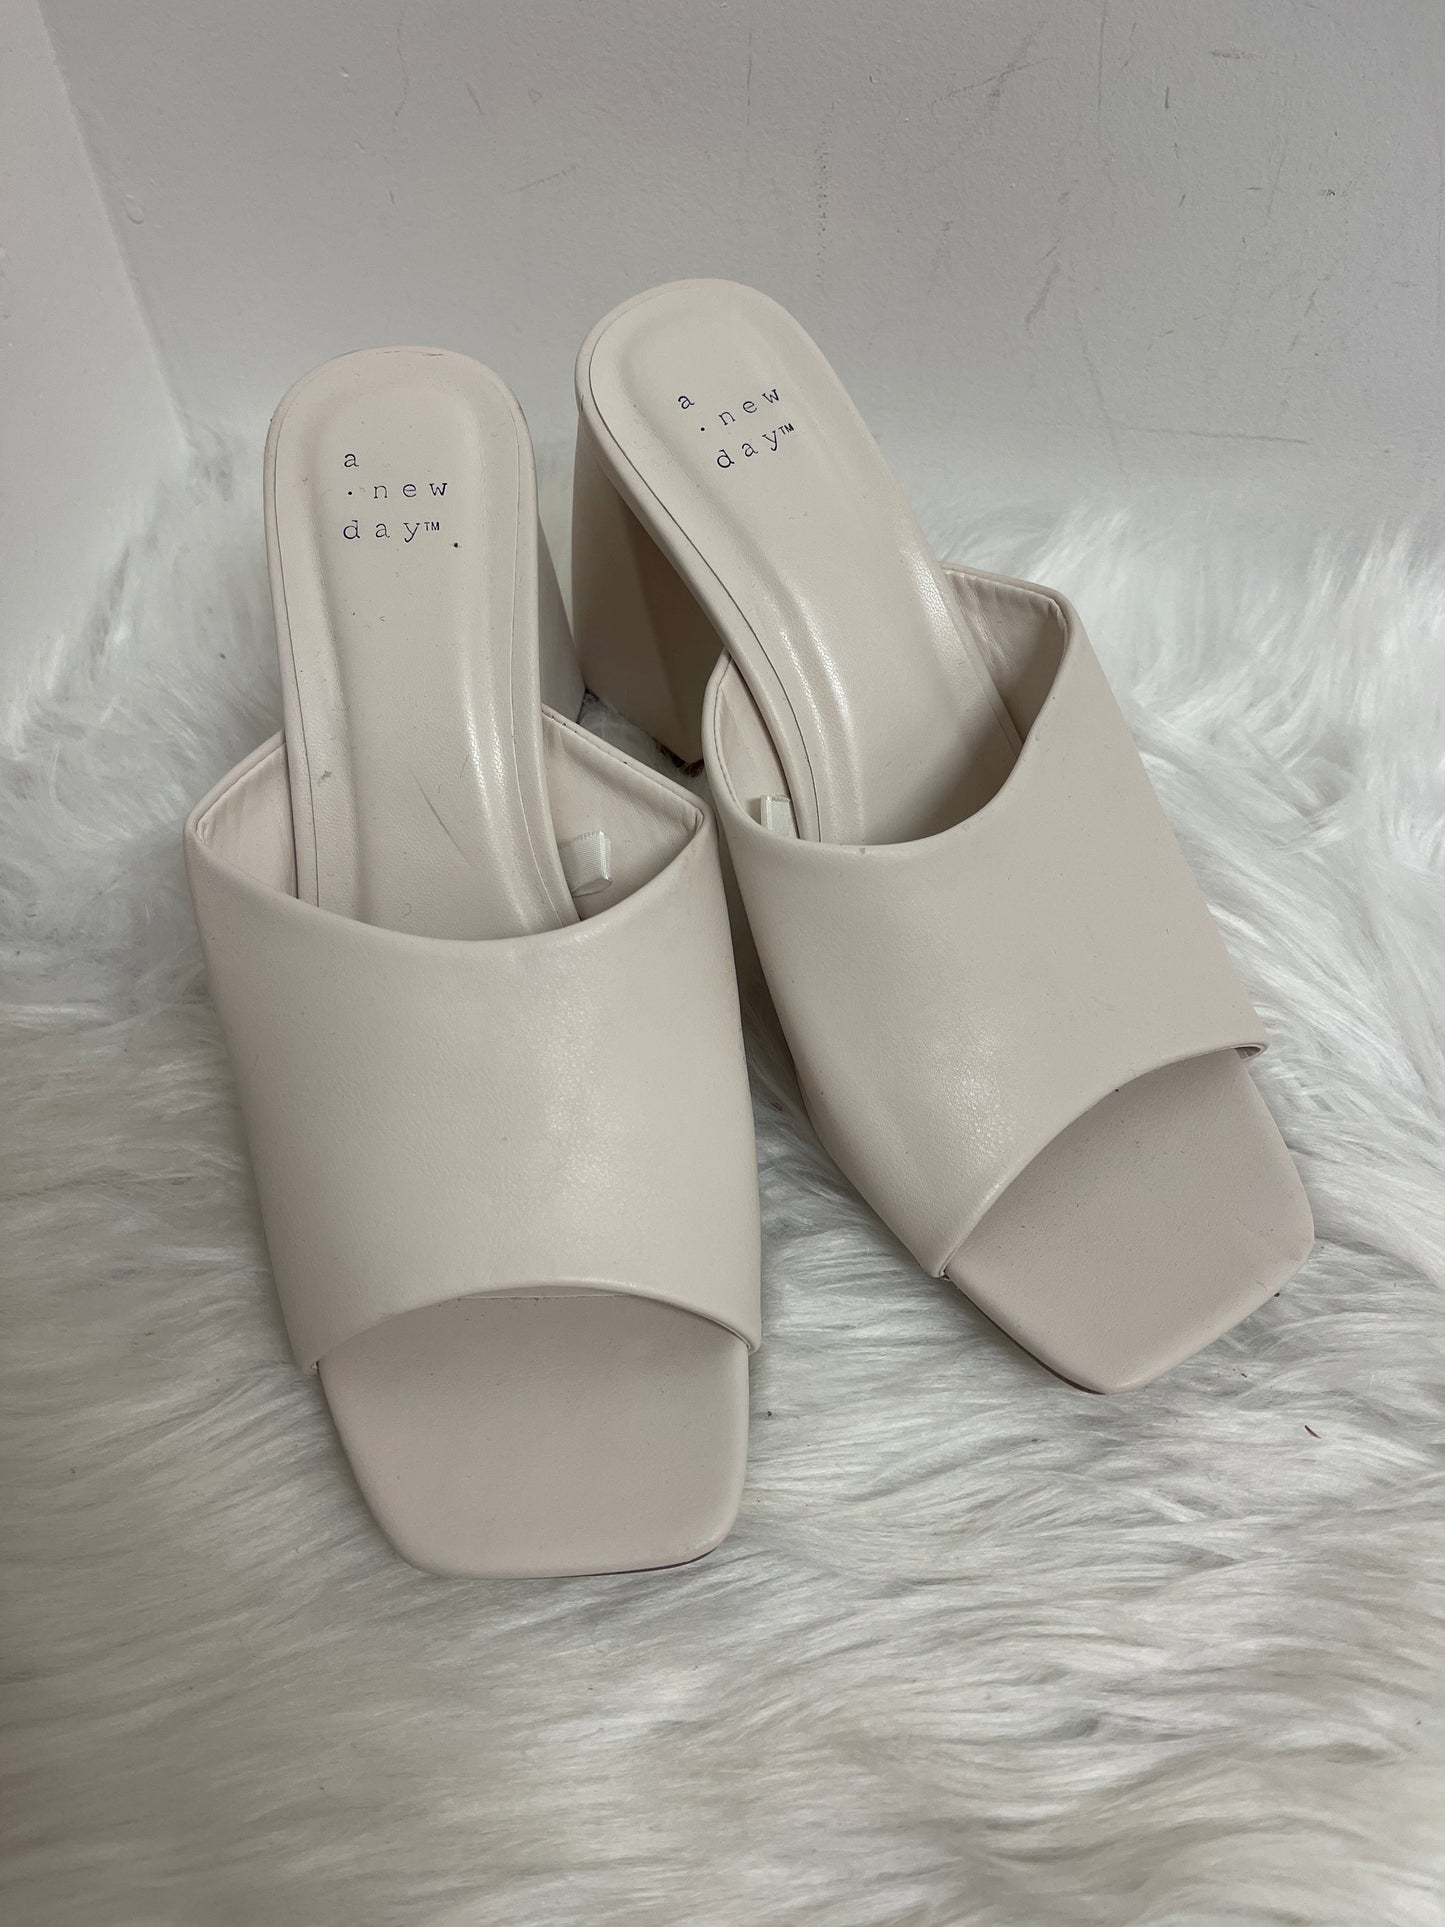 White Sandals Heels Block A New Day, Size 9.5